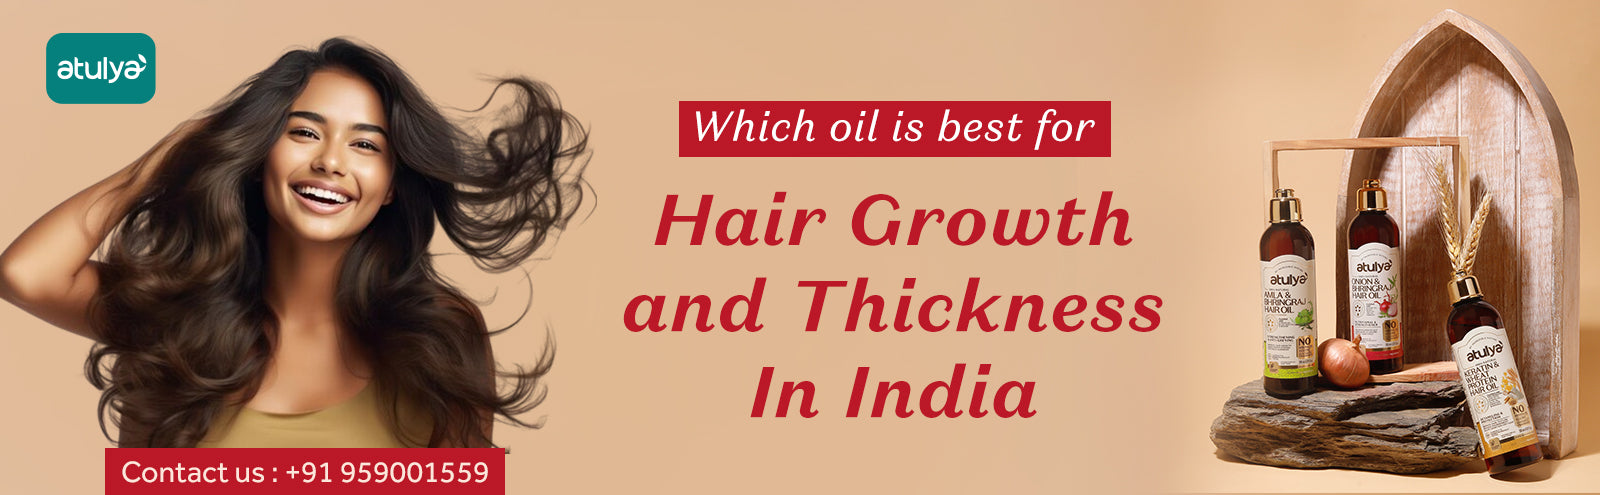 Which oil is best for hair growth and thickness in India